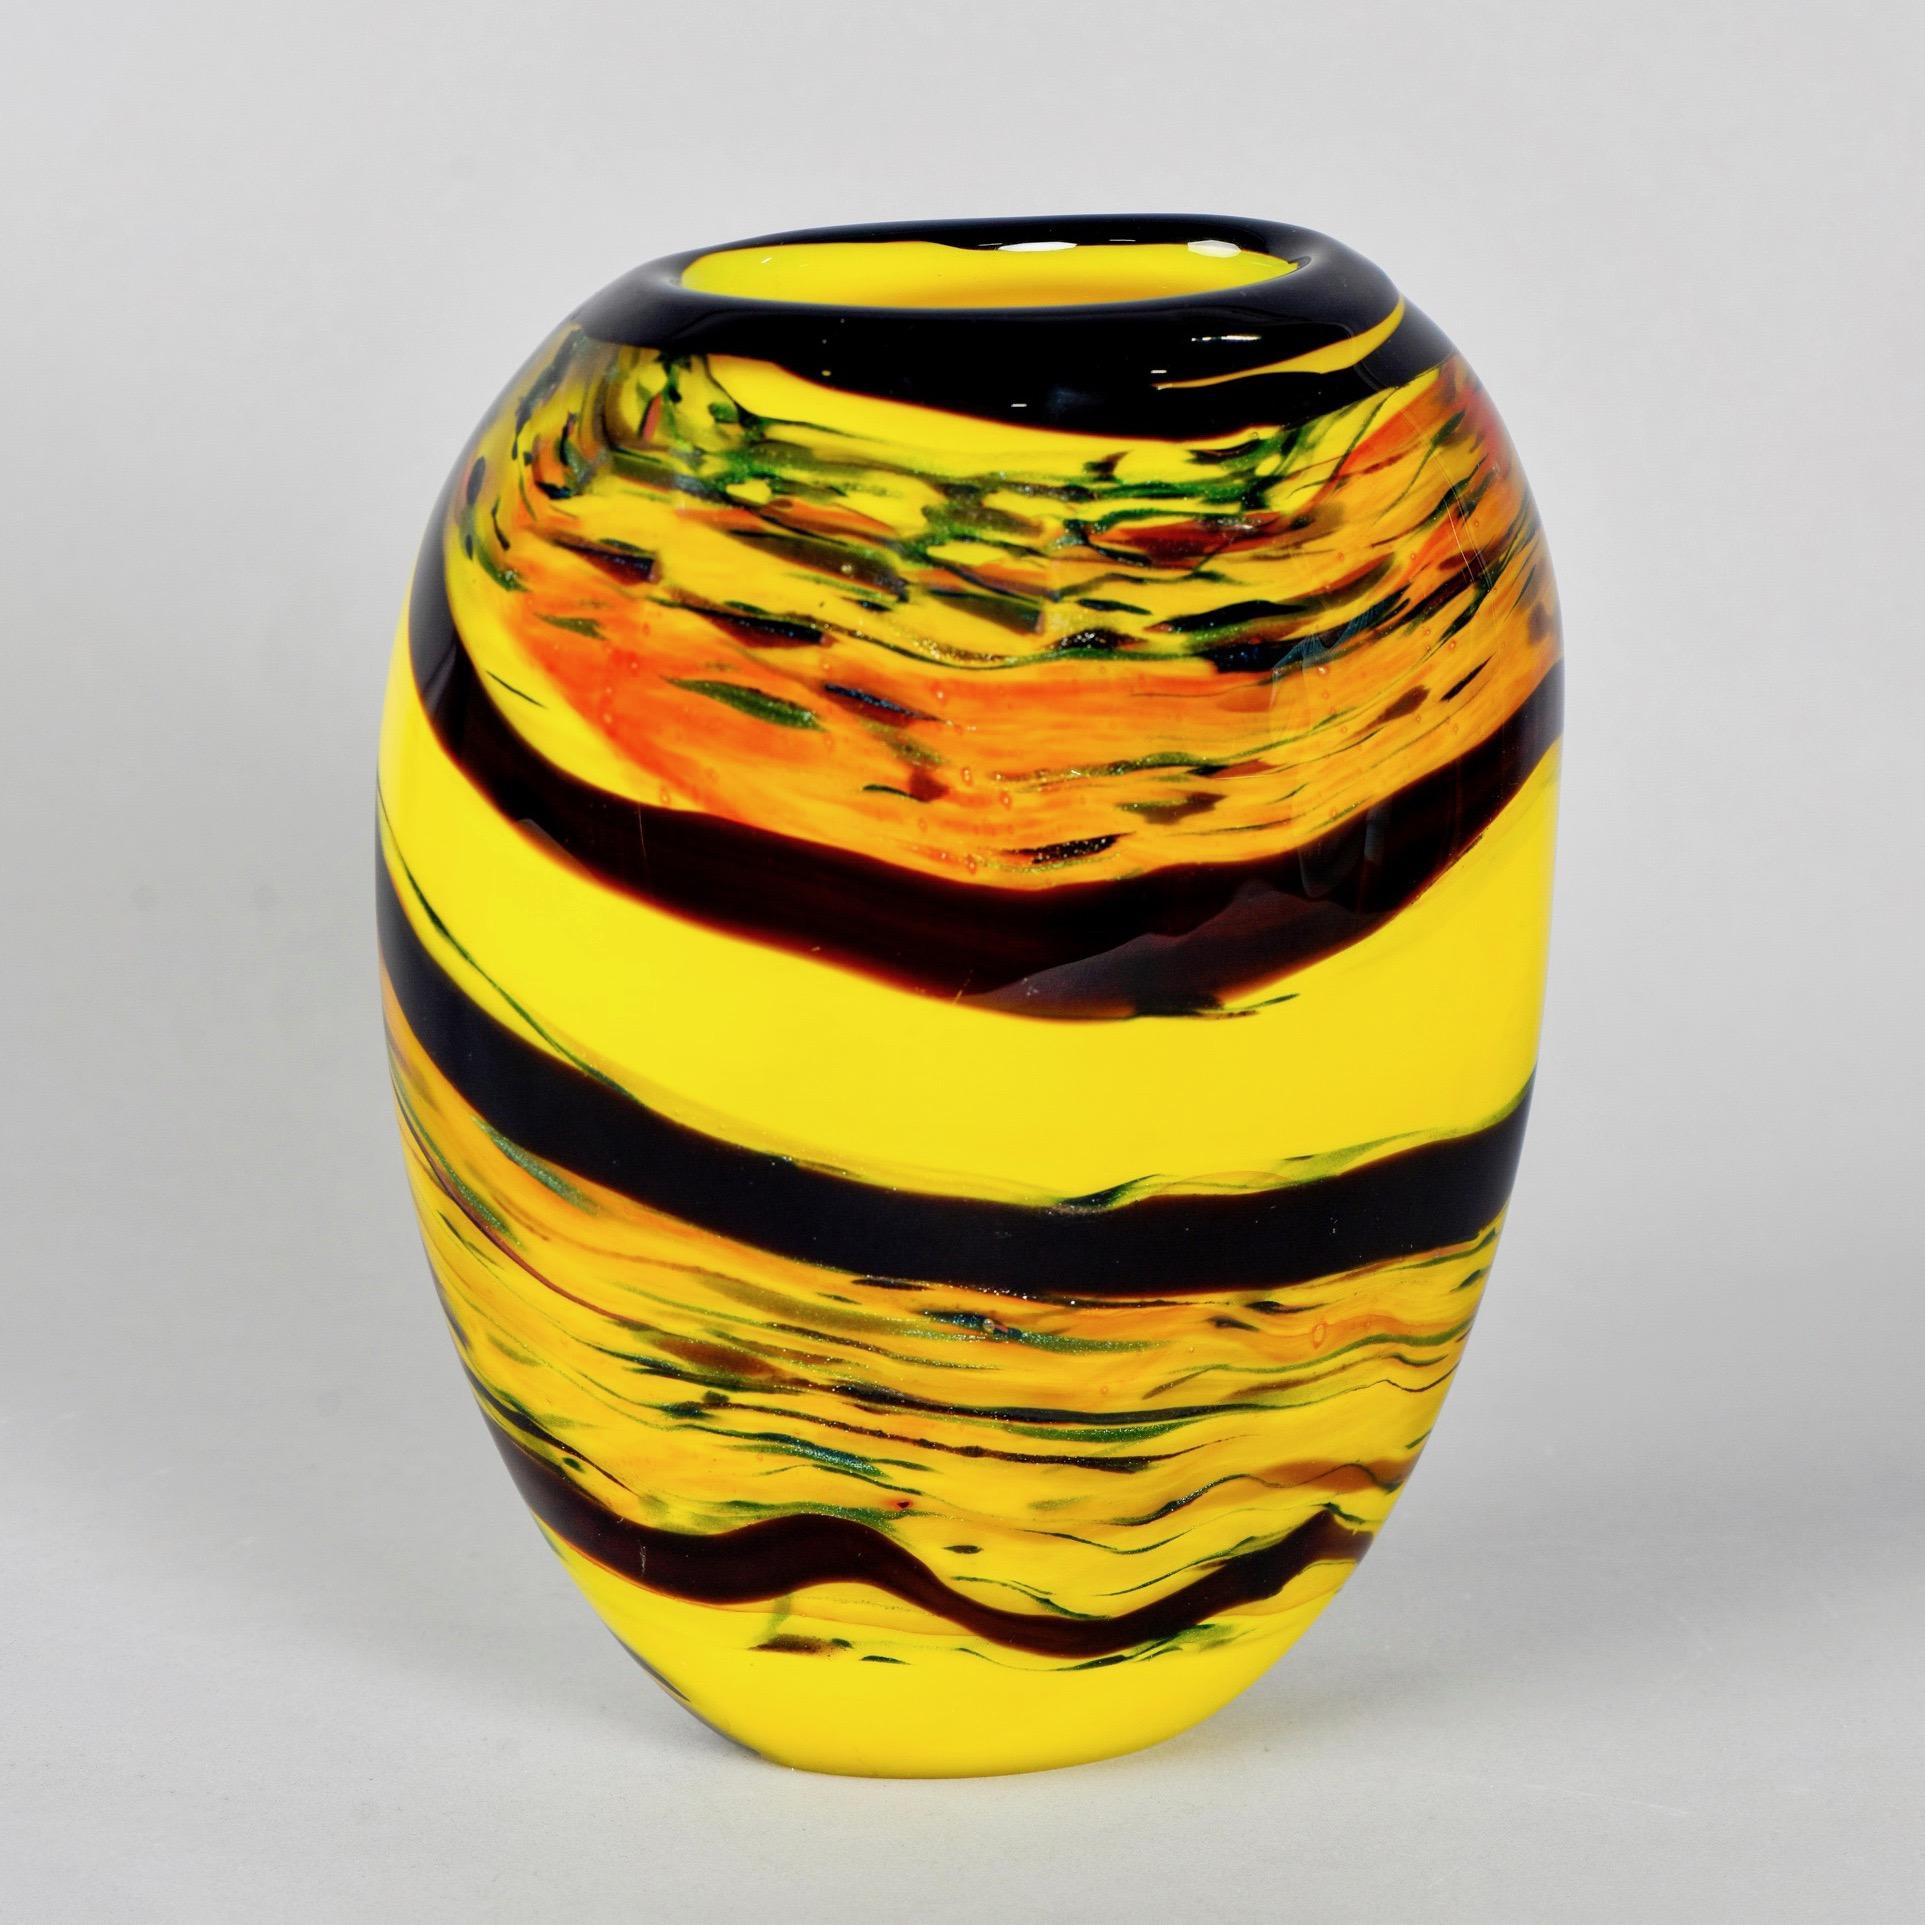 Murano glass vase in bold shades of yellow and gold with wavy black bands and a black rim, circa 2017.
     